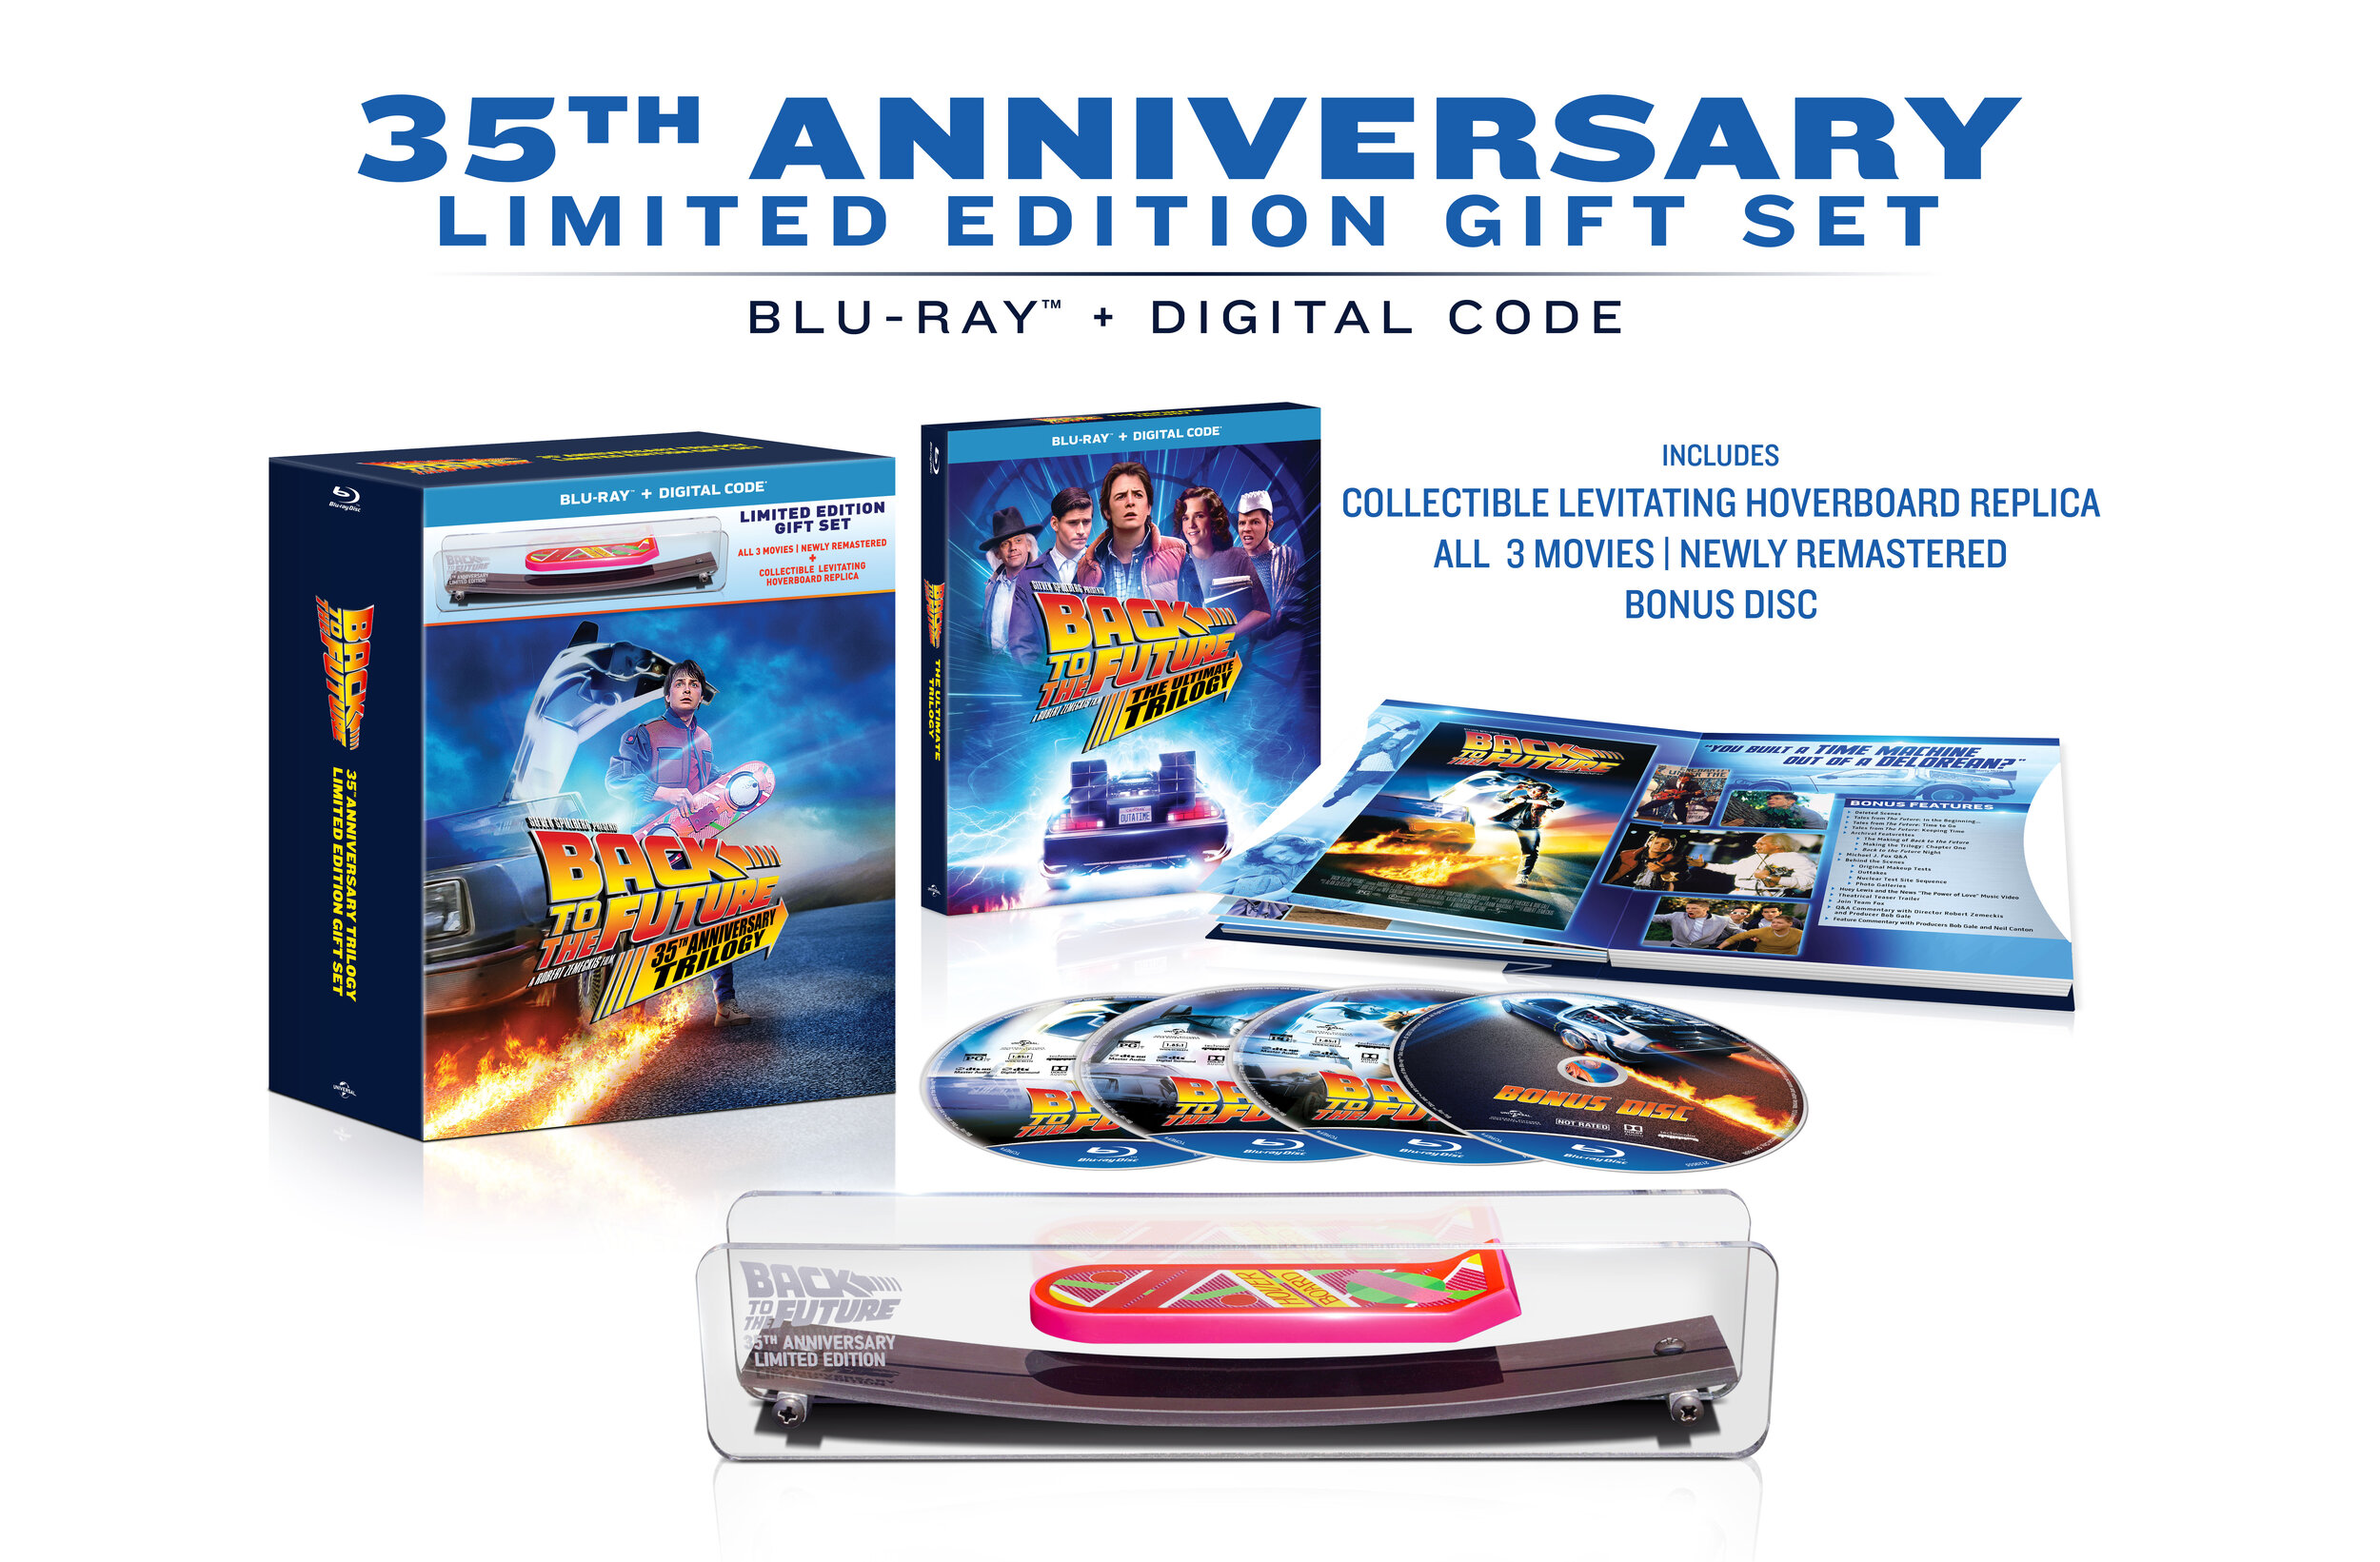 Back To The Future Trilogy One Of The Biggest Motion Picture Trilogies Comes To 4k Ultra Hd For The First Time Ever